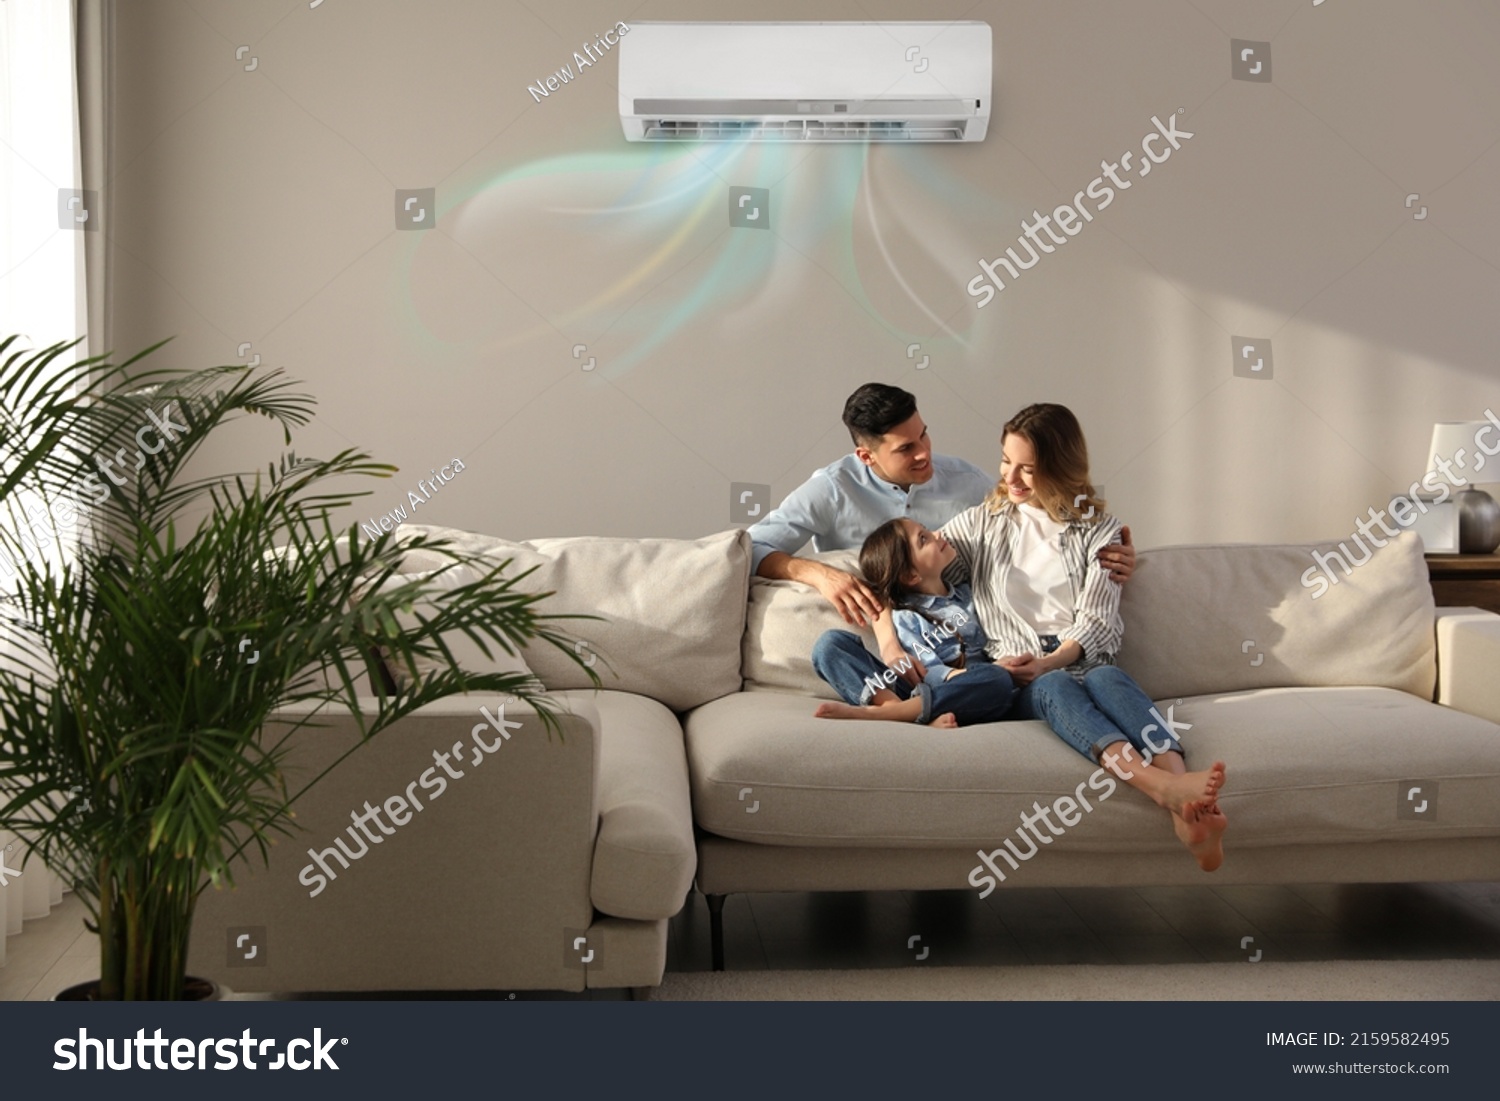 Happy family resting under air conditioner on beige wall at home #2159582495